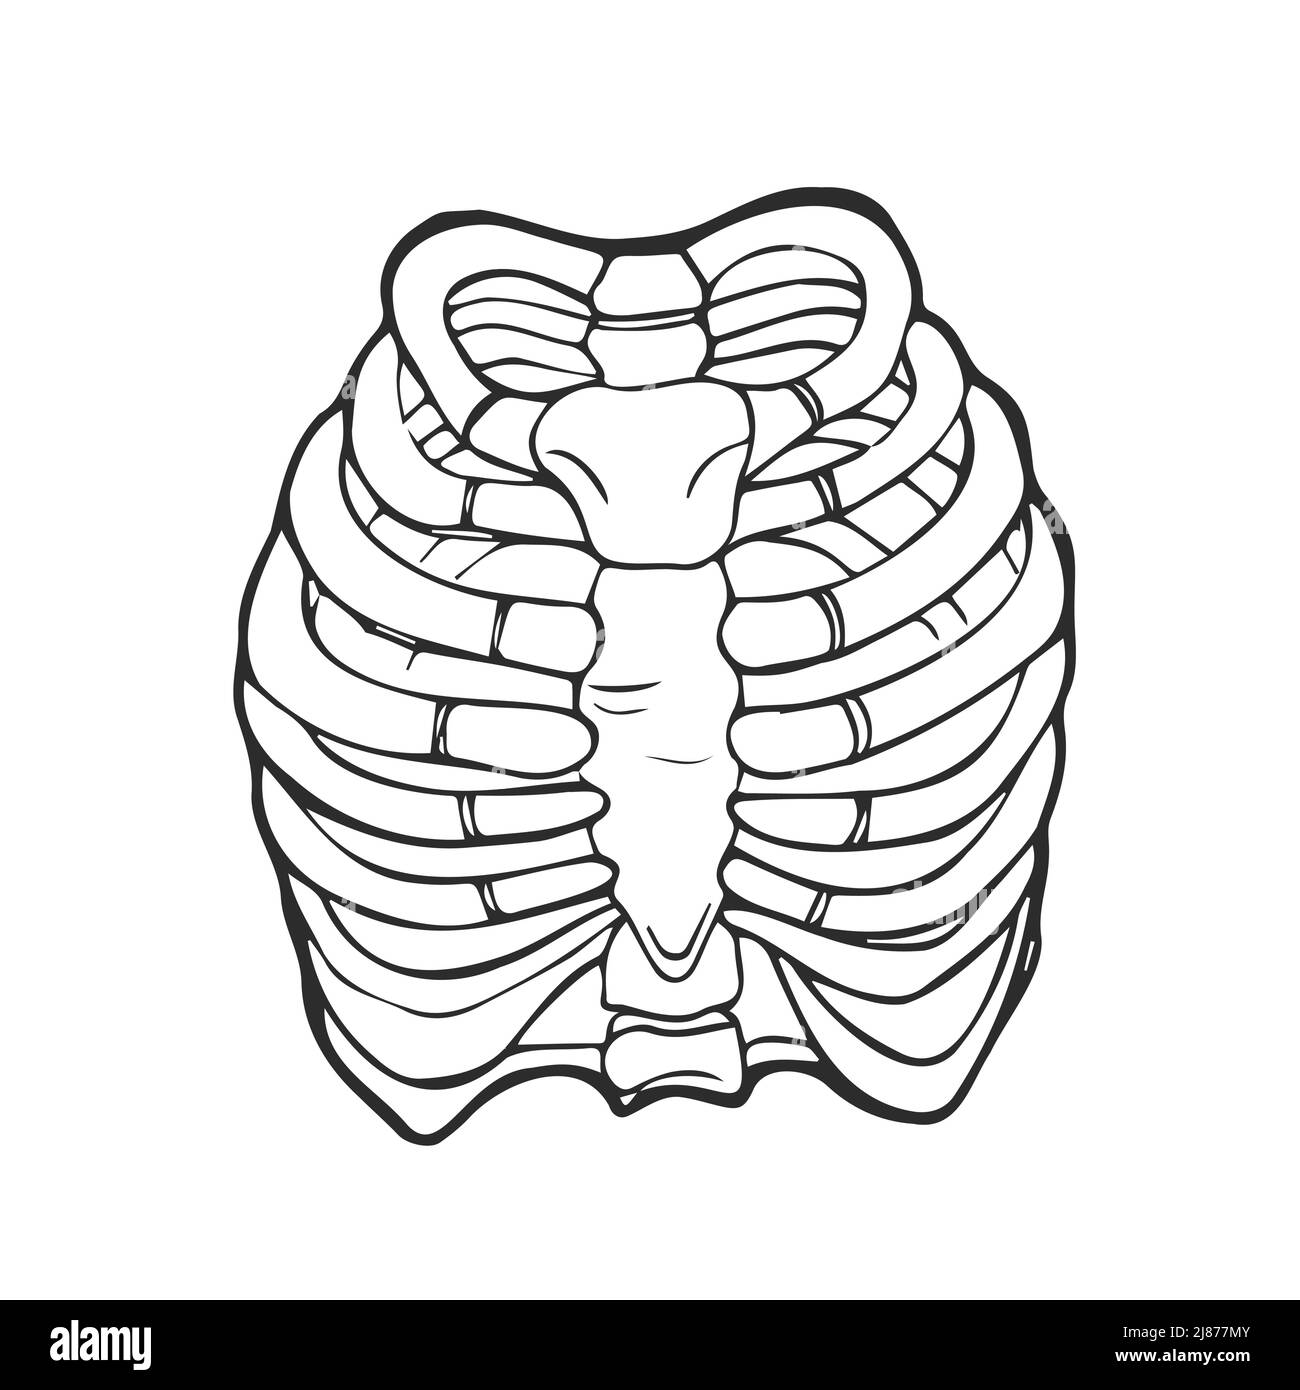 Doodle Illustration of human rib cage. Line art style. Boho vector realistic. Isolated Stock Vector